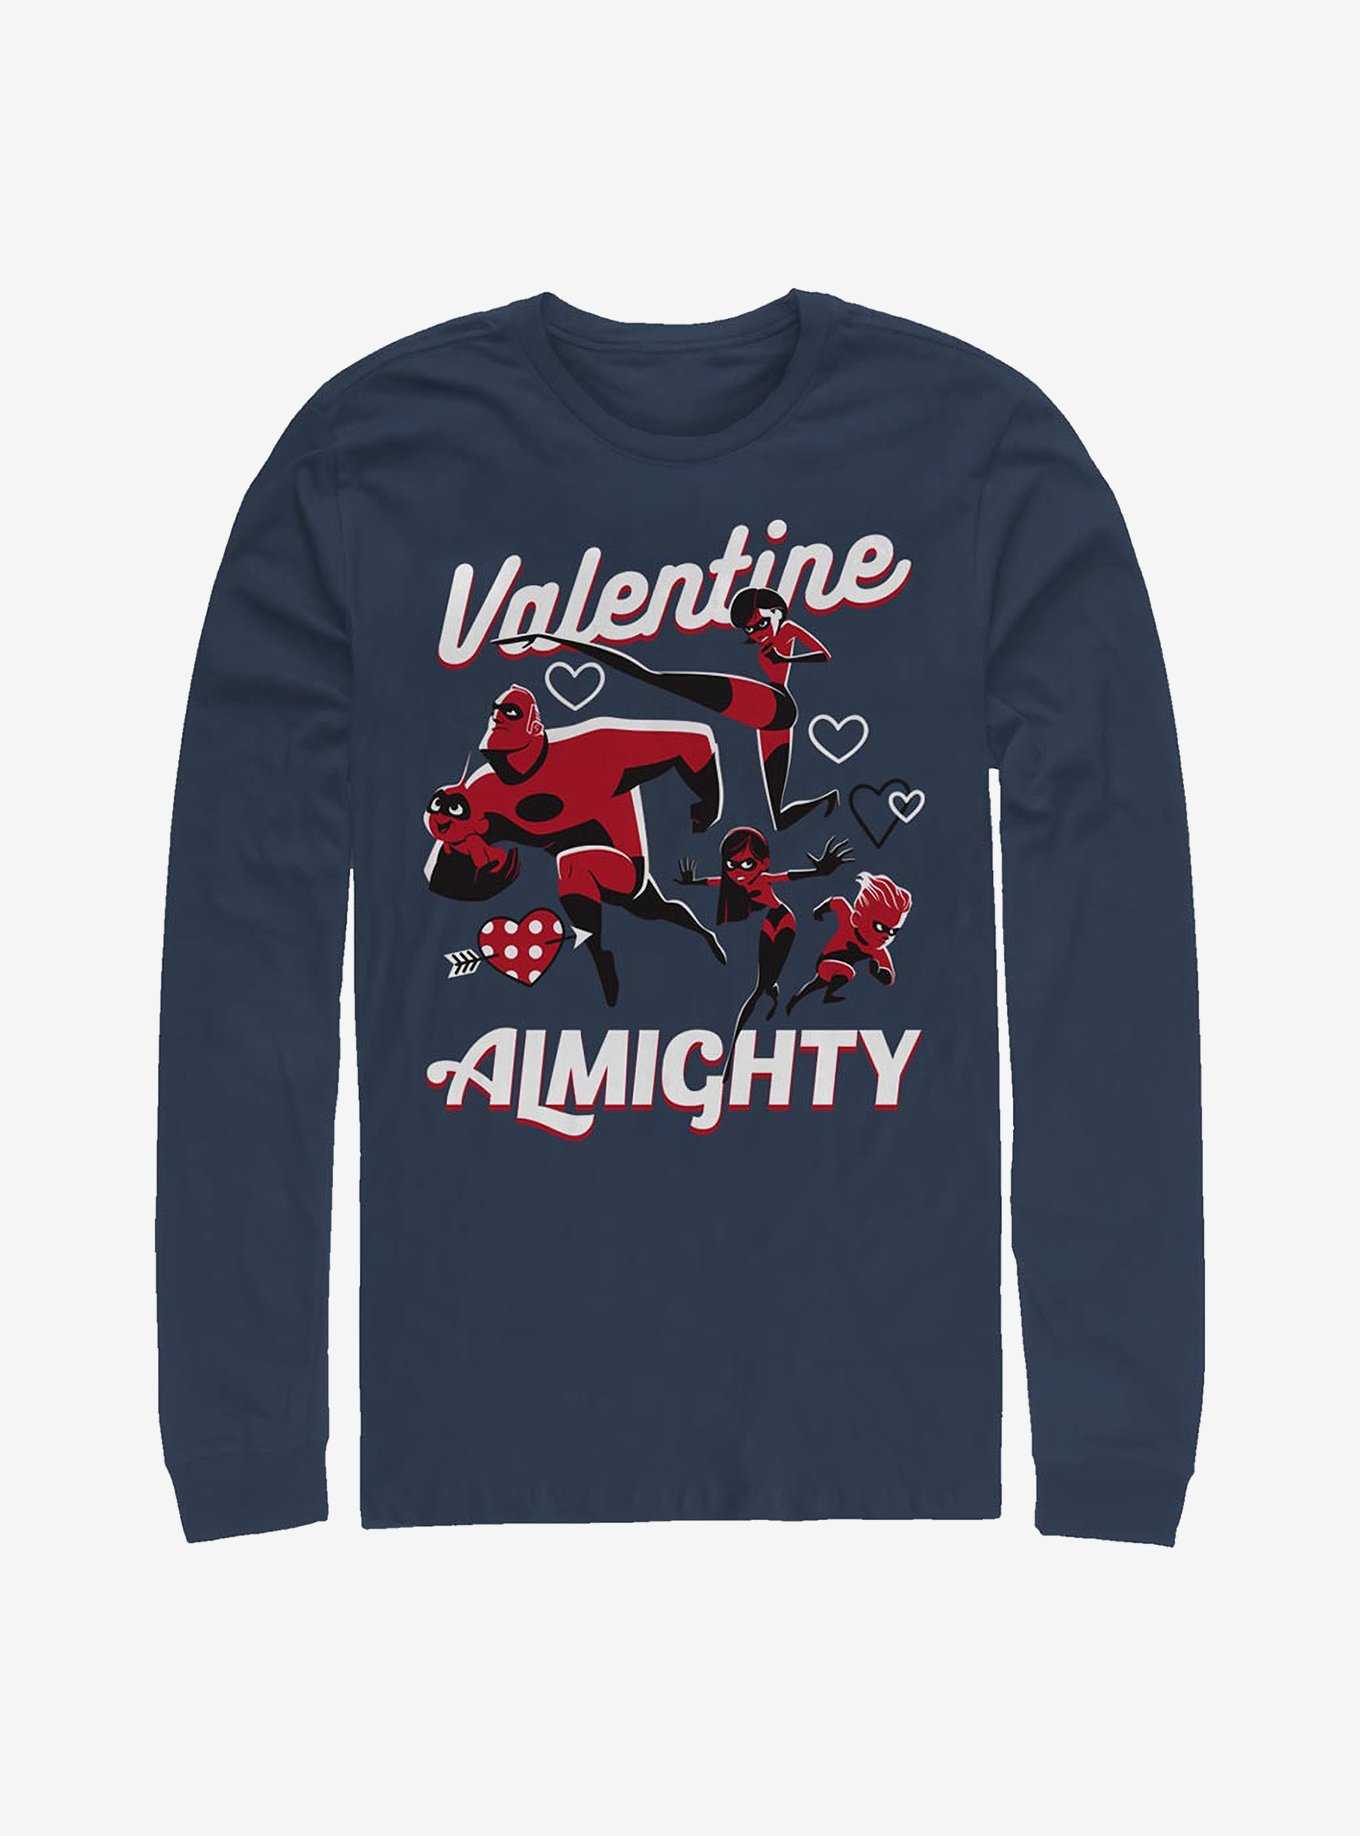 Disney Pixar The Incredibles Valentine Almighty Long-Sleeve T-Shirt, , hi-res